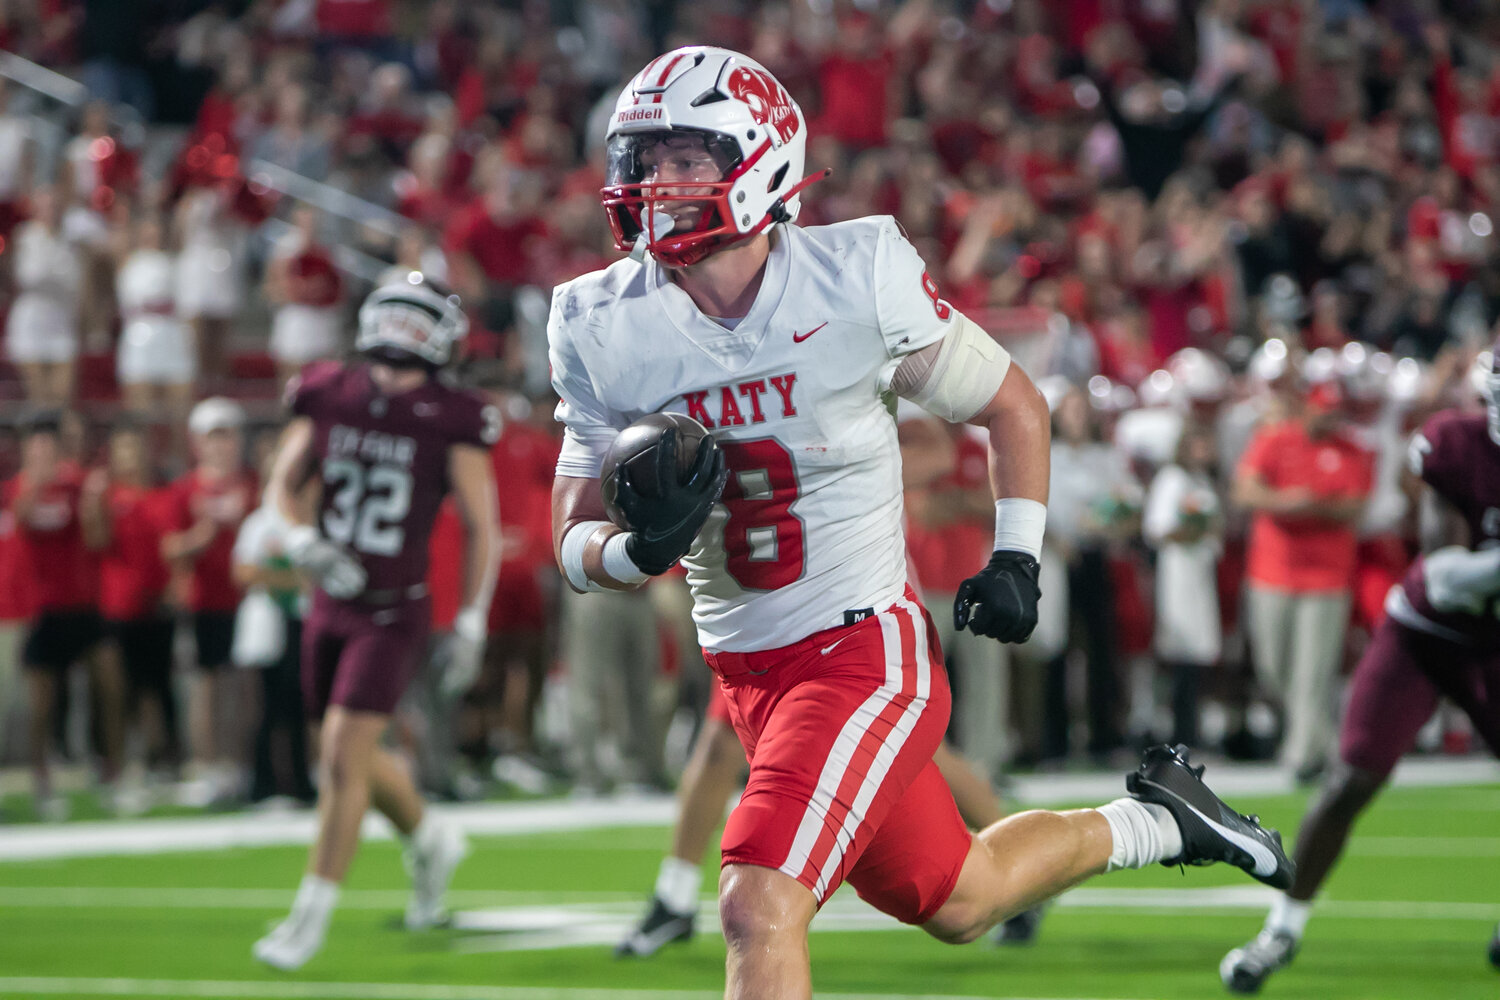 Chase Johnsey runs into the endzone during Friday's area round game between Katy and Cy-Fair at the Berry Center in Cypress.